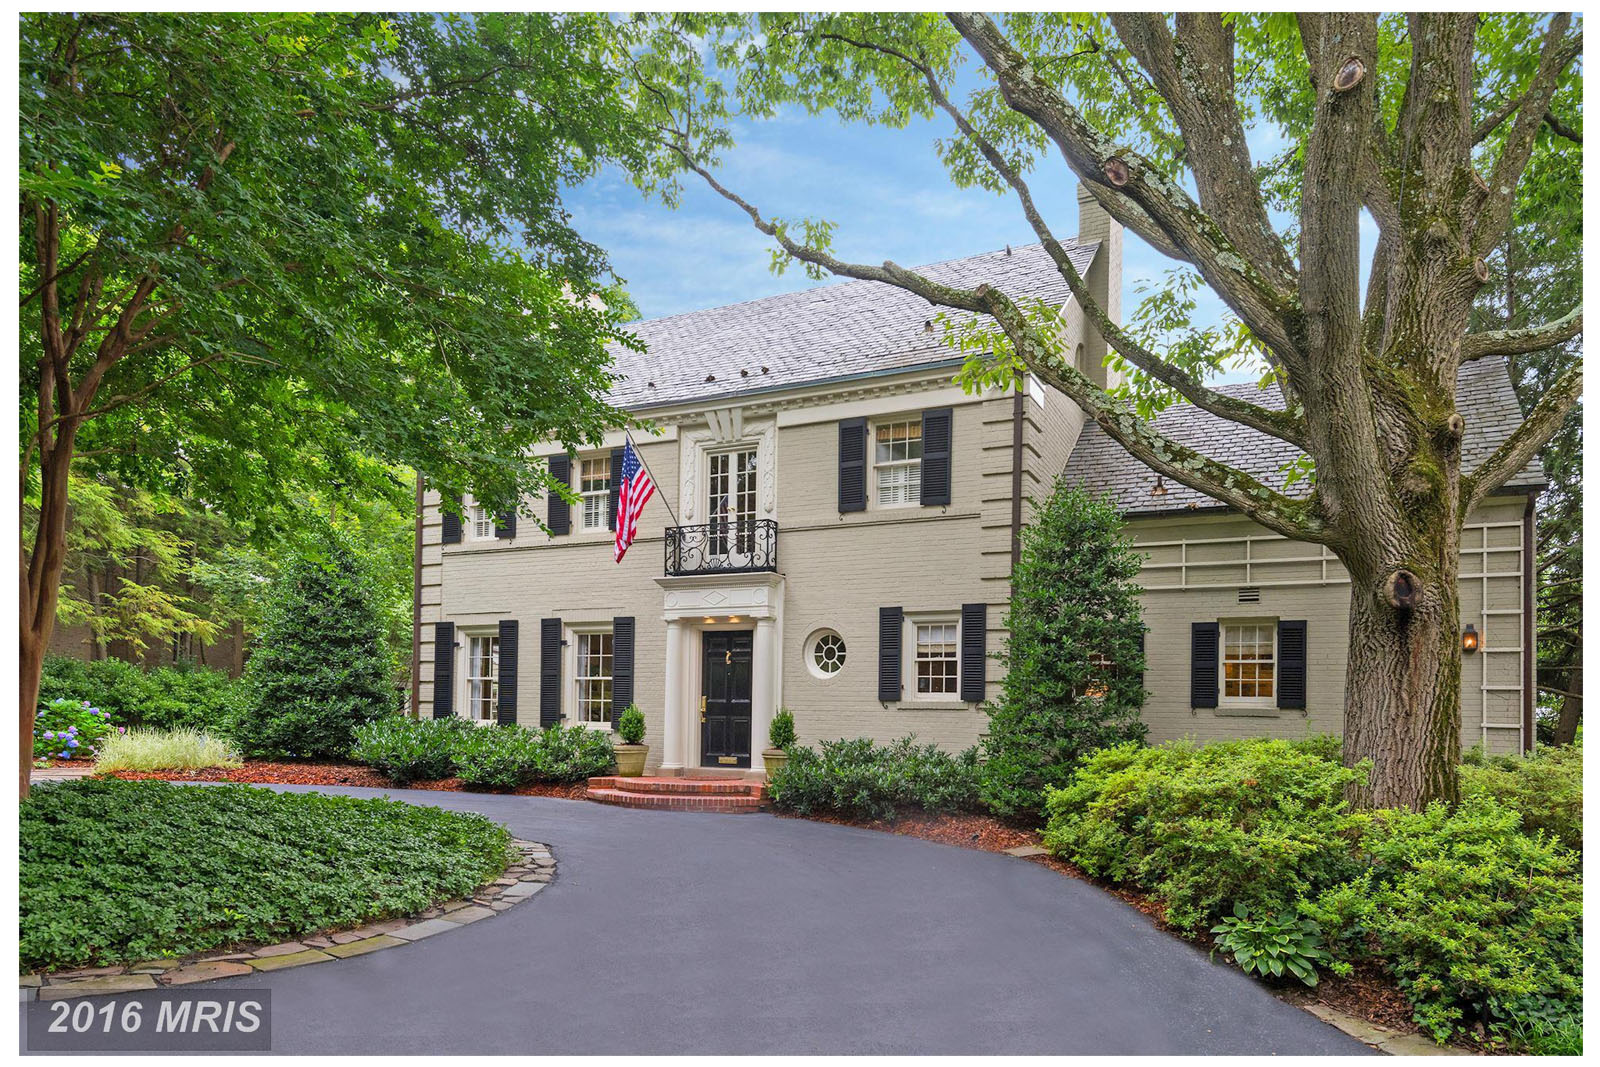 10. $2,550,000
This four-bedroom mansion in the Berkley neighborhood of D.C. also has four bathrooms and two half baths. (MRIS)